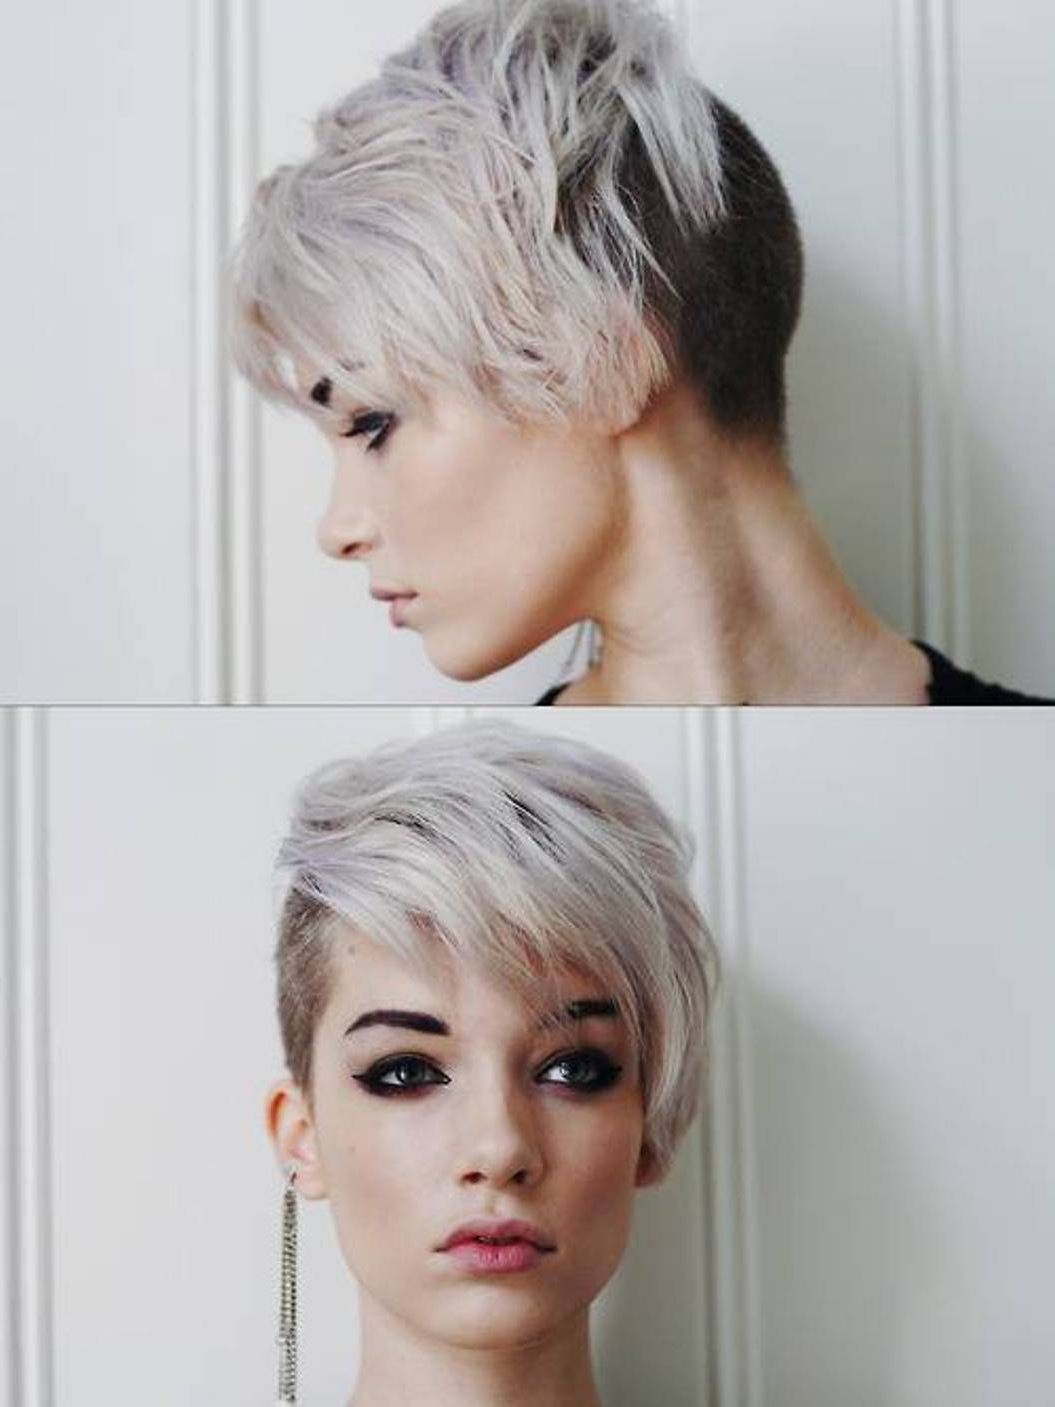 20 Shaved Hairstyles For Women | Things For Me To Do For Me Within Short Hairstyles With Shaved Sides For Women (View 4 of 25)